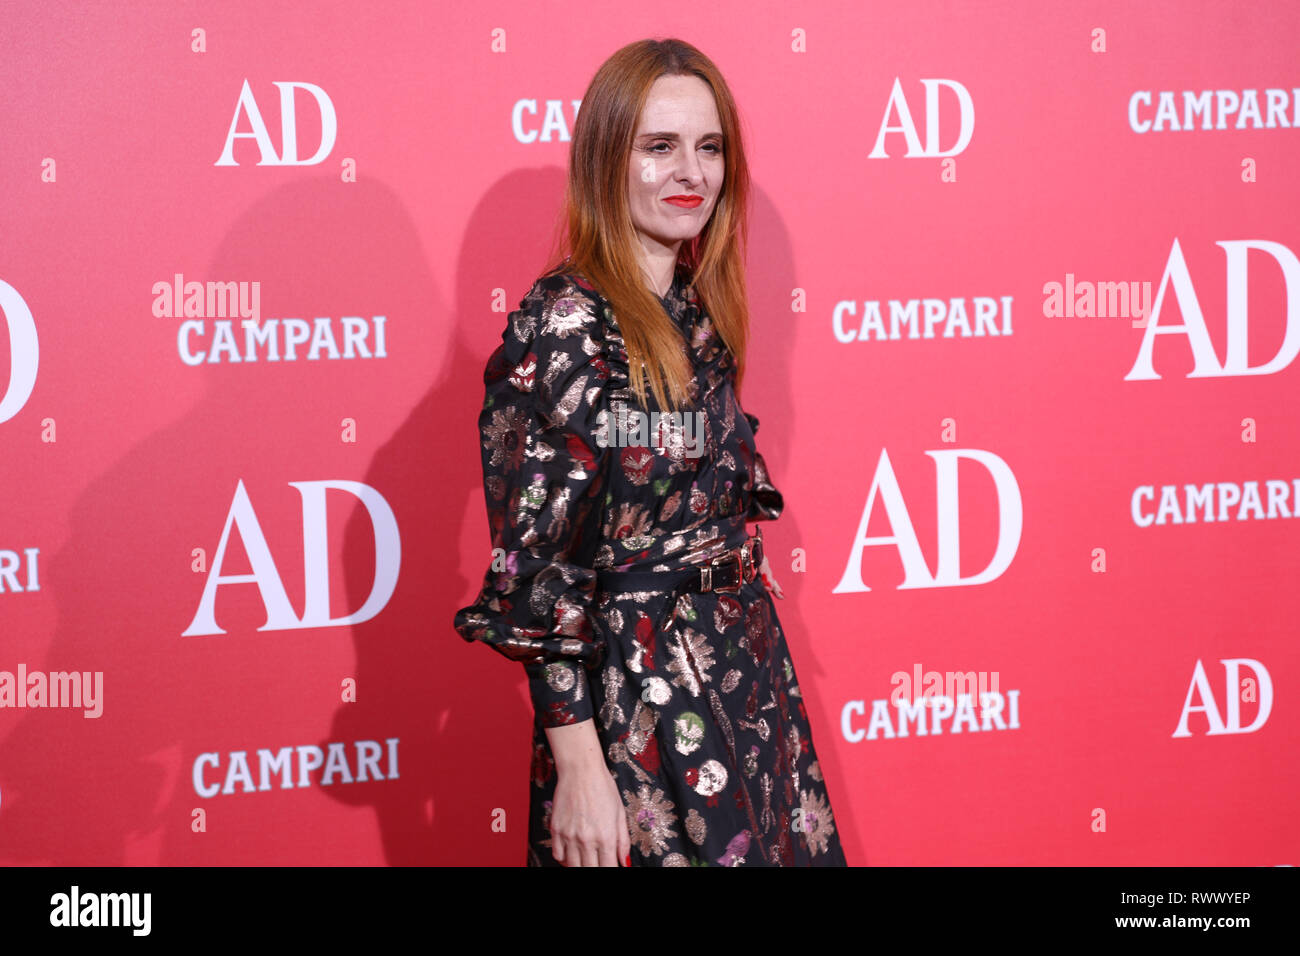 Ana Locking, Spanish designer, artist and photographer seen on the red carpet during the XII Edition of the Interior Design, Design and Architecture Awards organized by the AD magazine in the Teatro Real de Madrid. Stock Photo